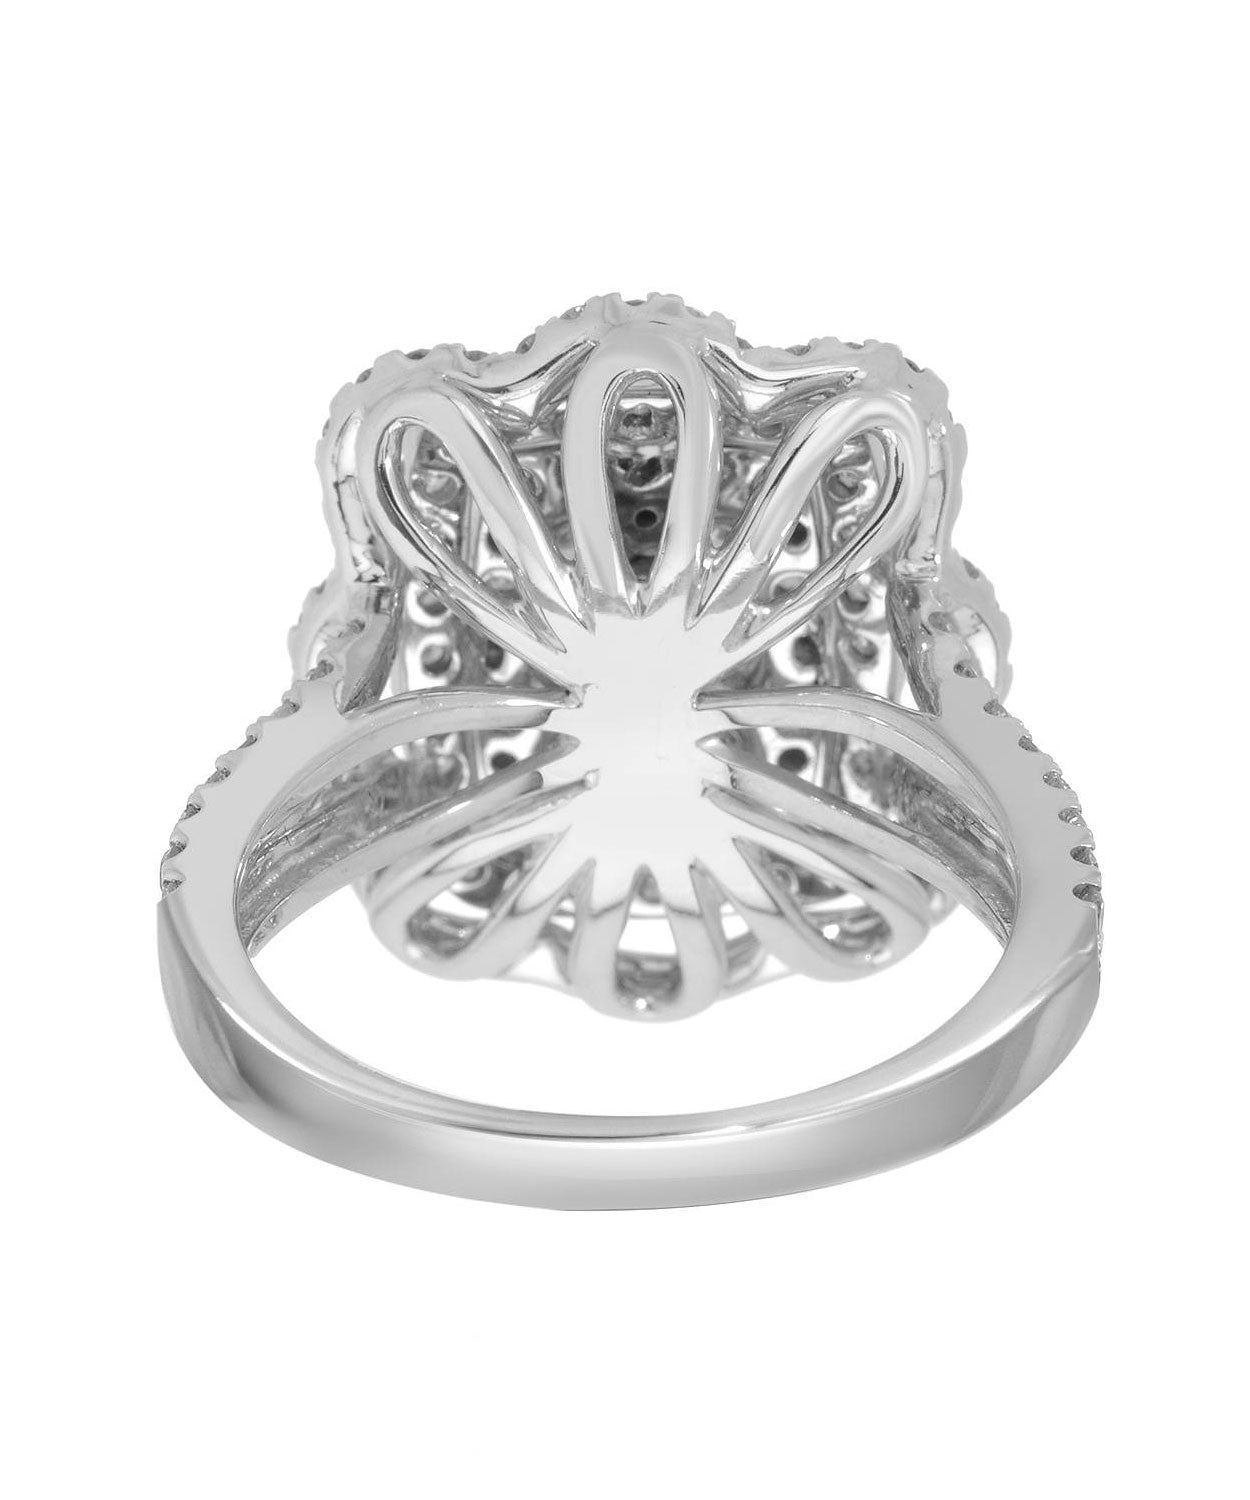 Signature Collection 1.50 ctw Diamond 14k White Gold Statement Right Hand Ring View 3